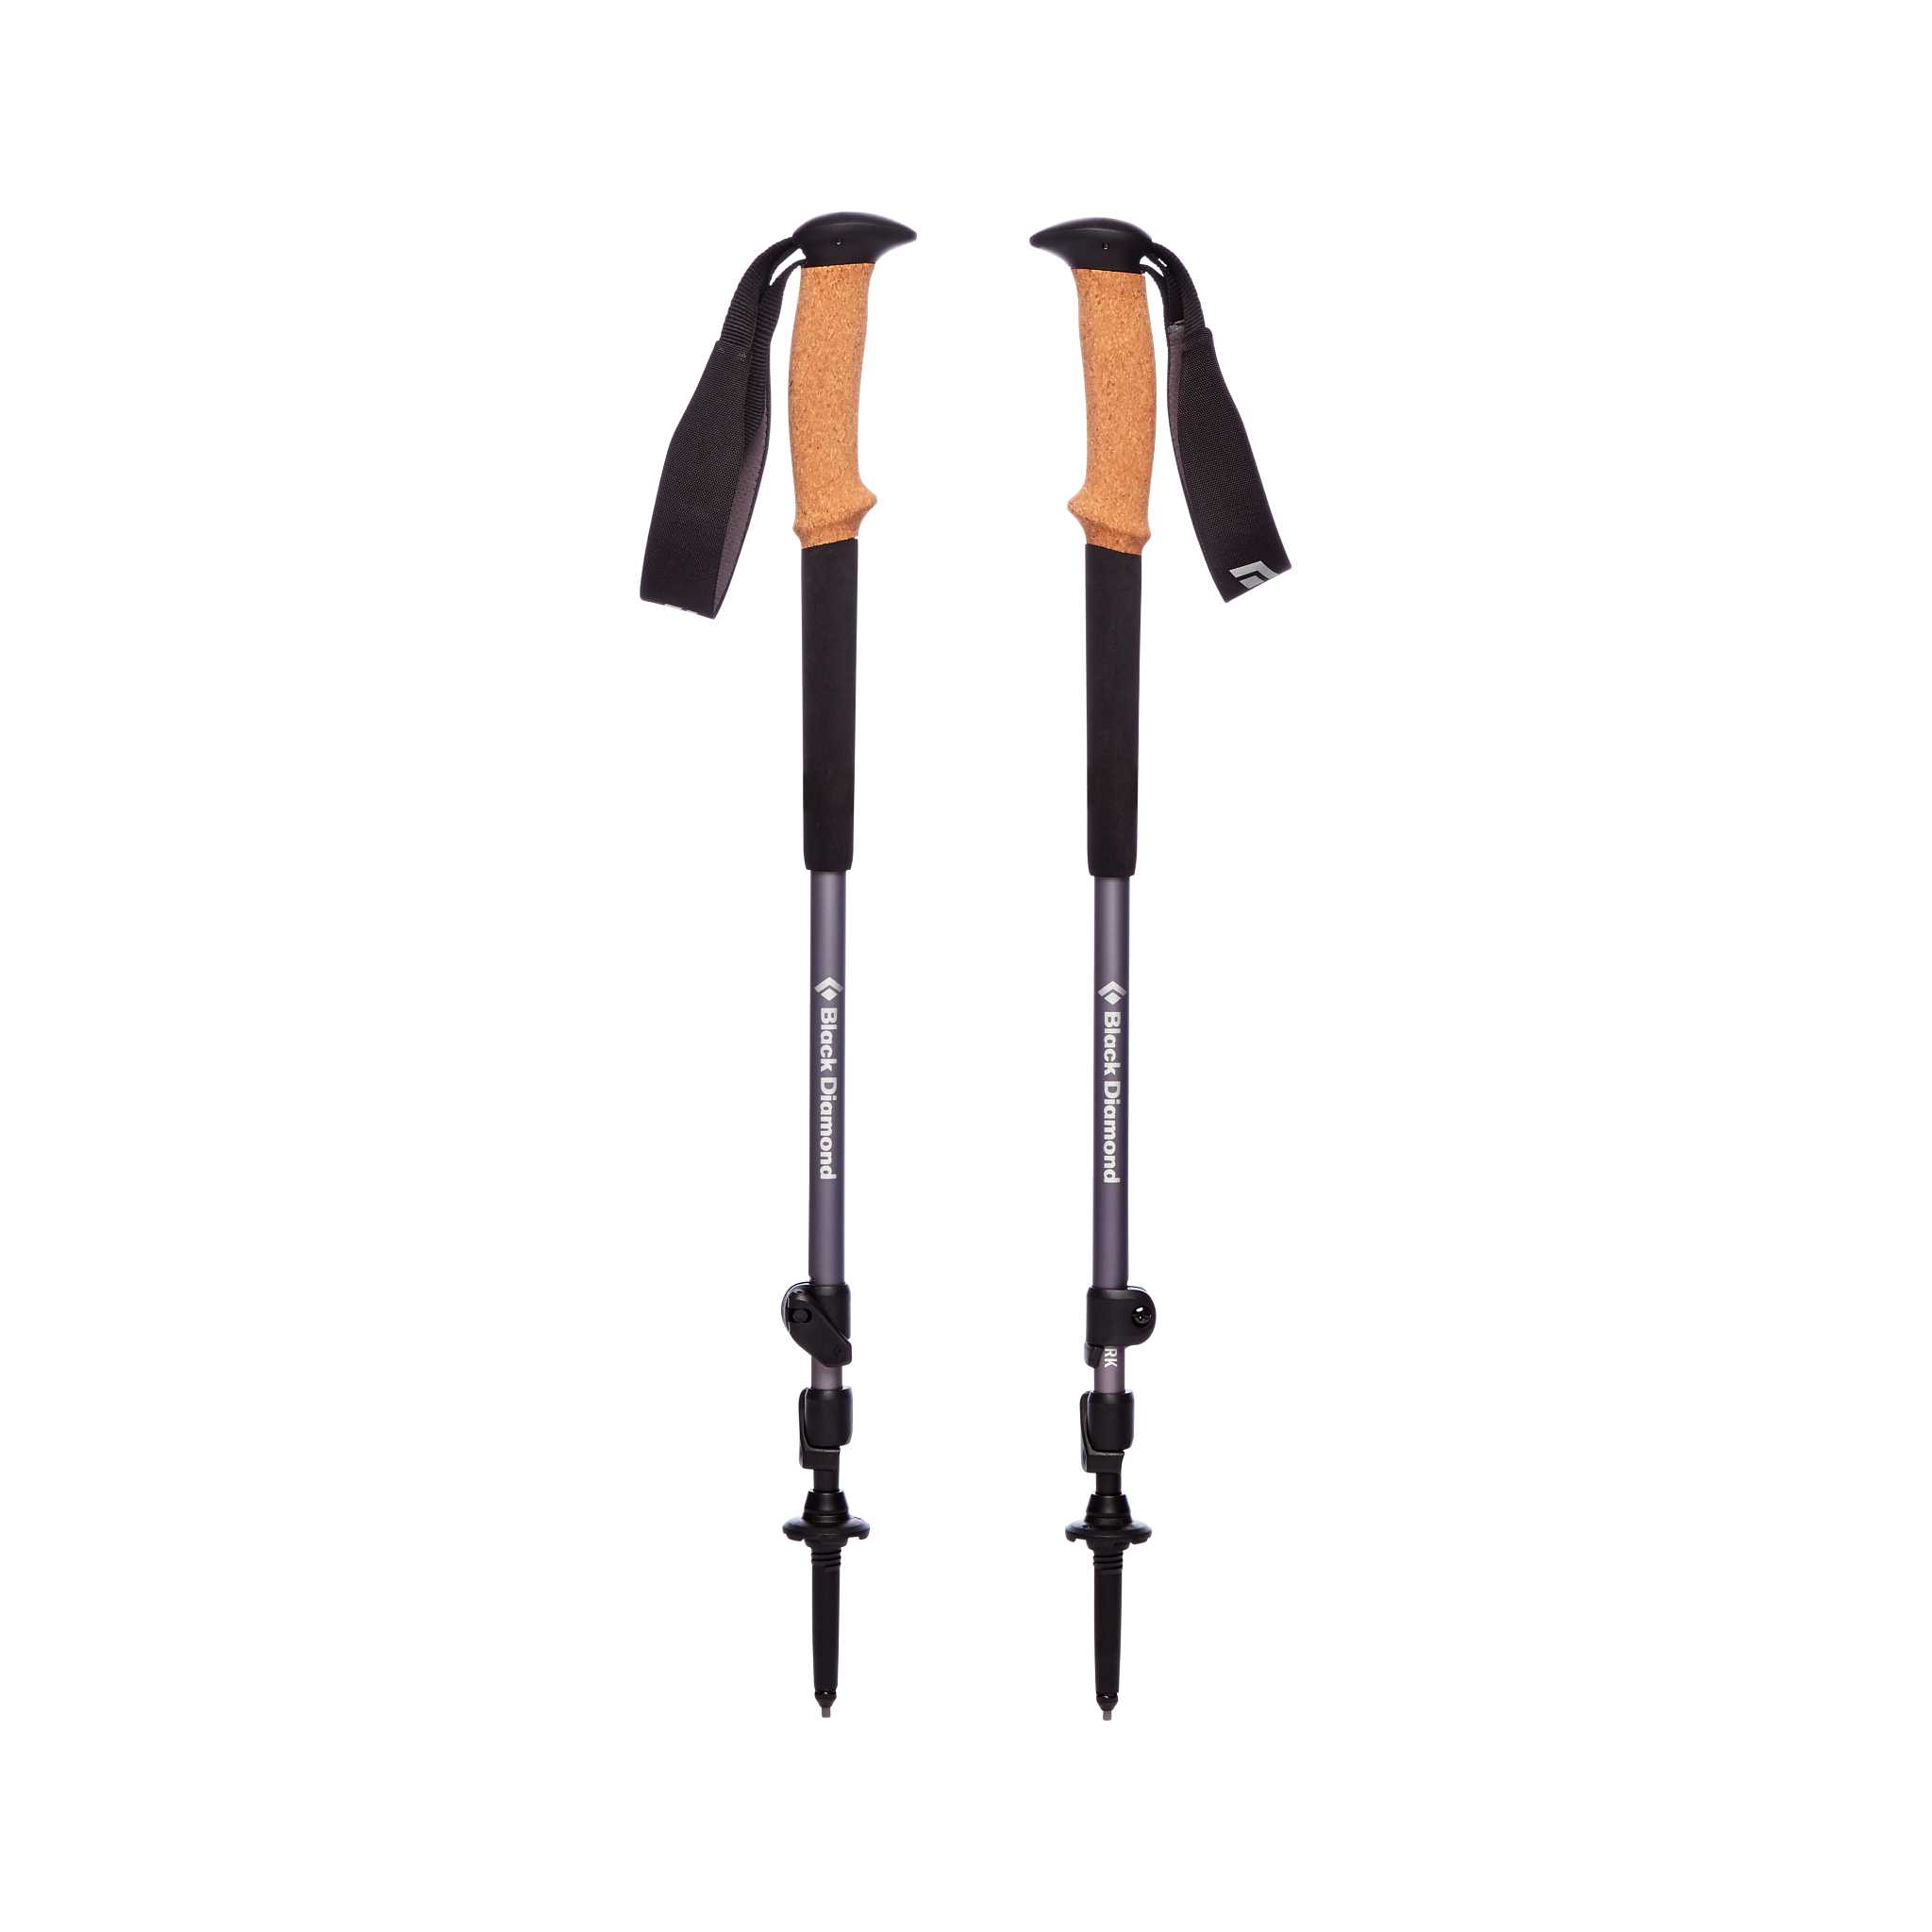 The 11 best trekking poles 2023 with good grip and stability